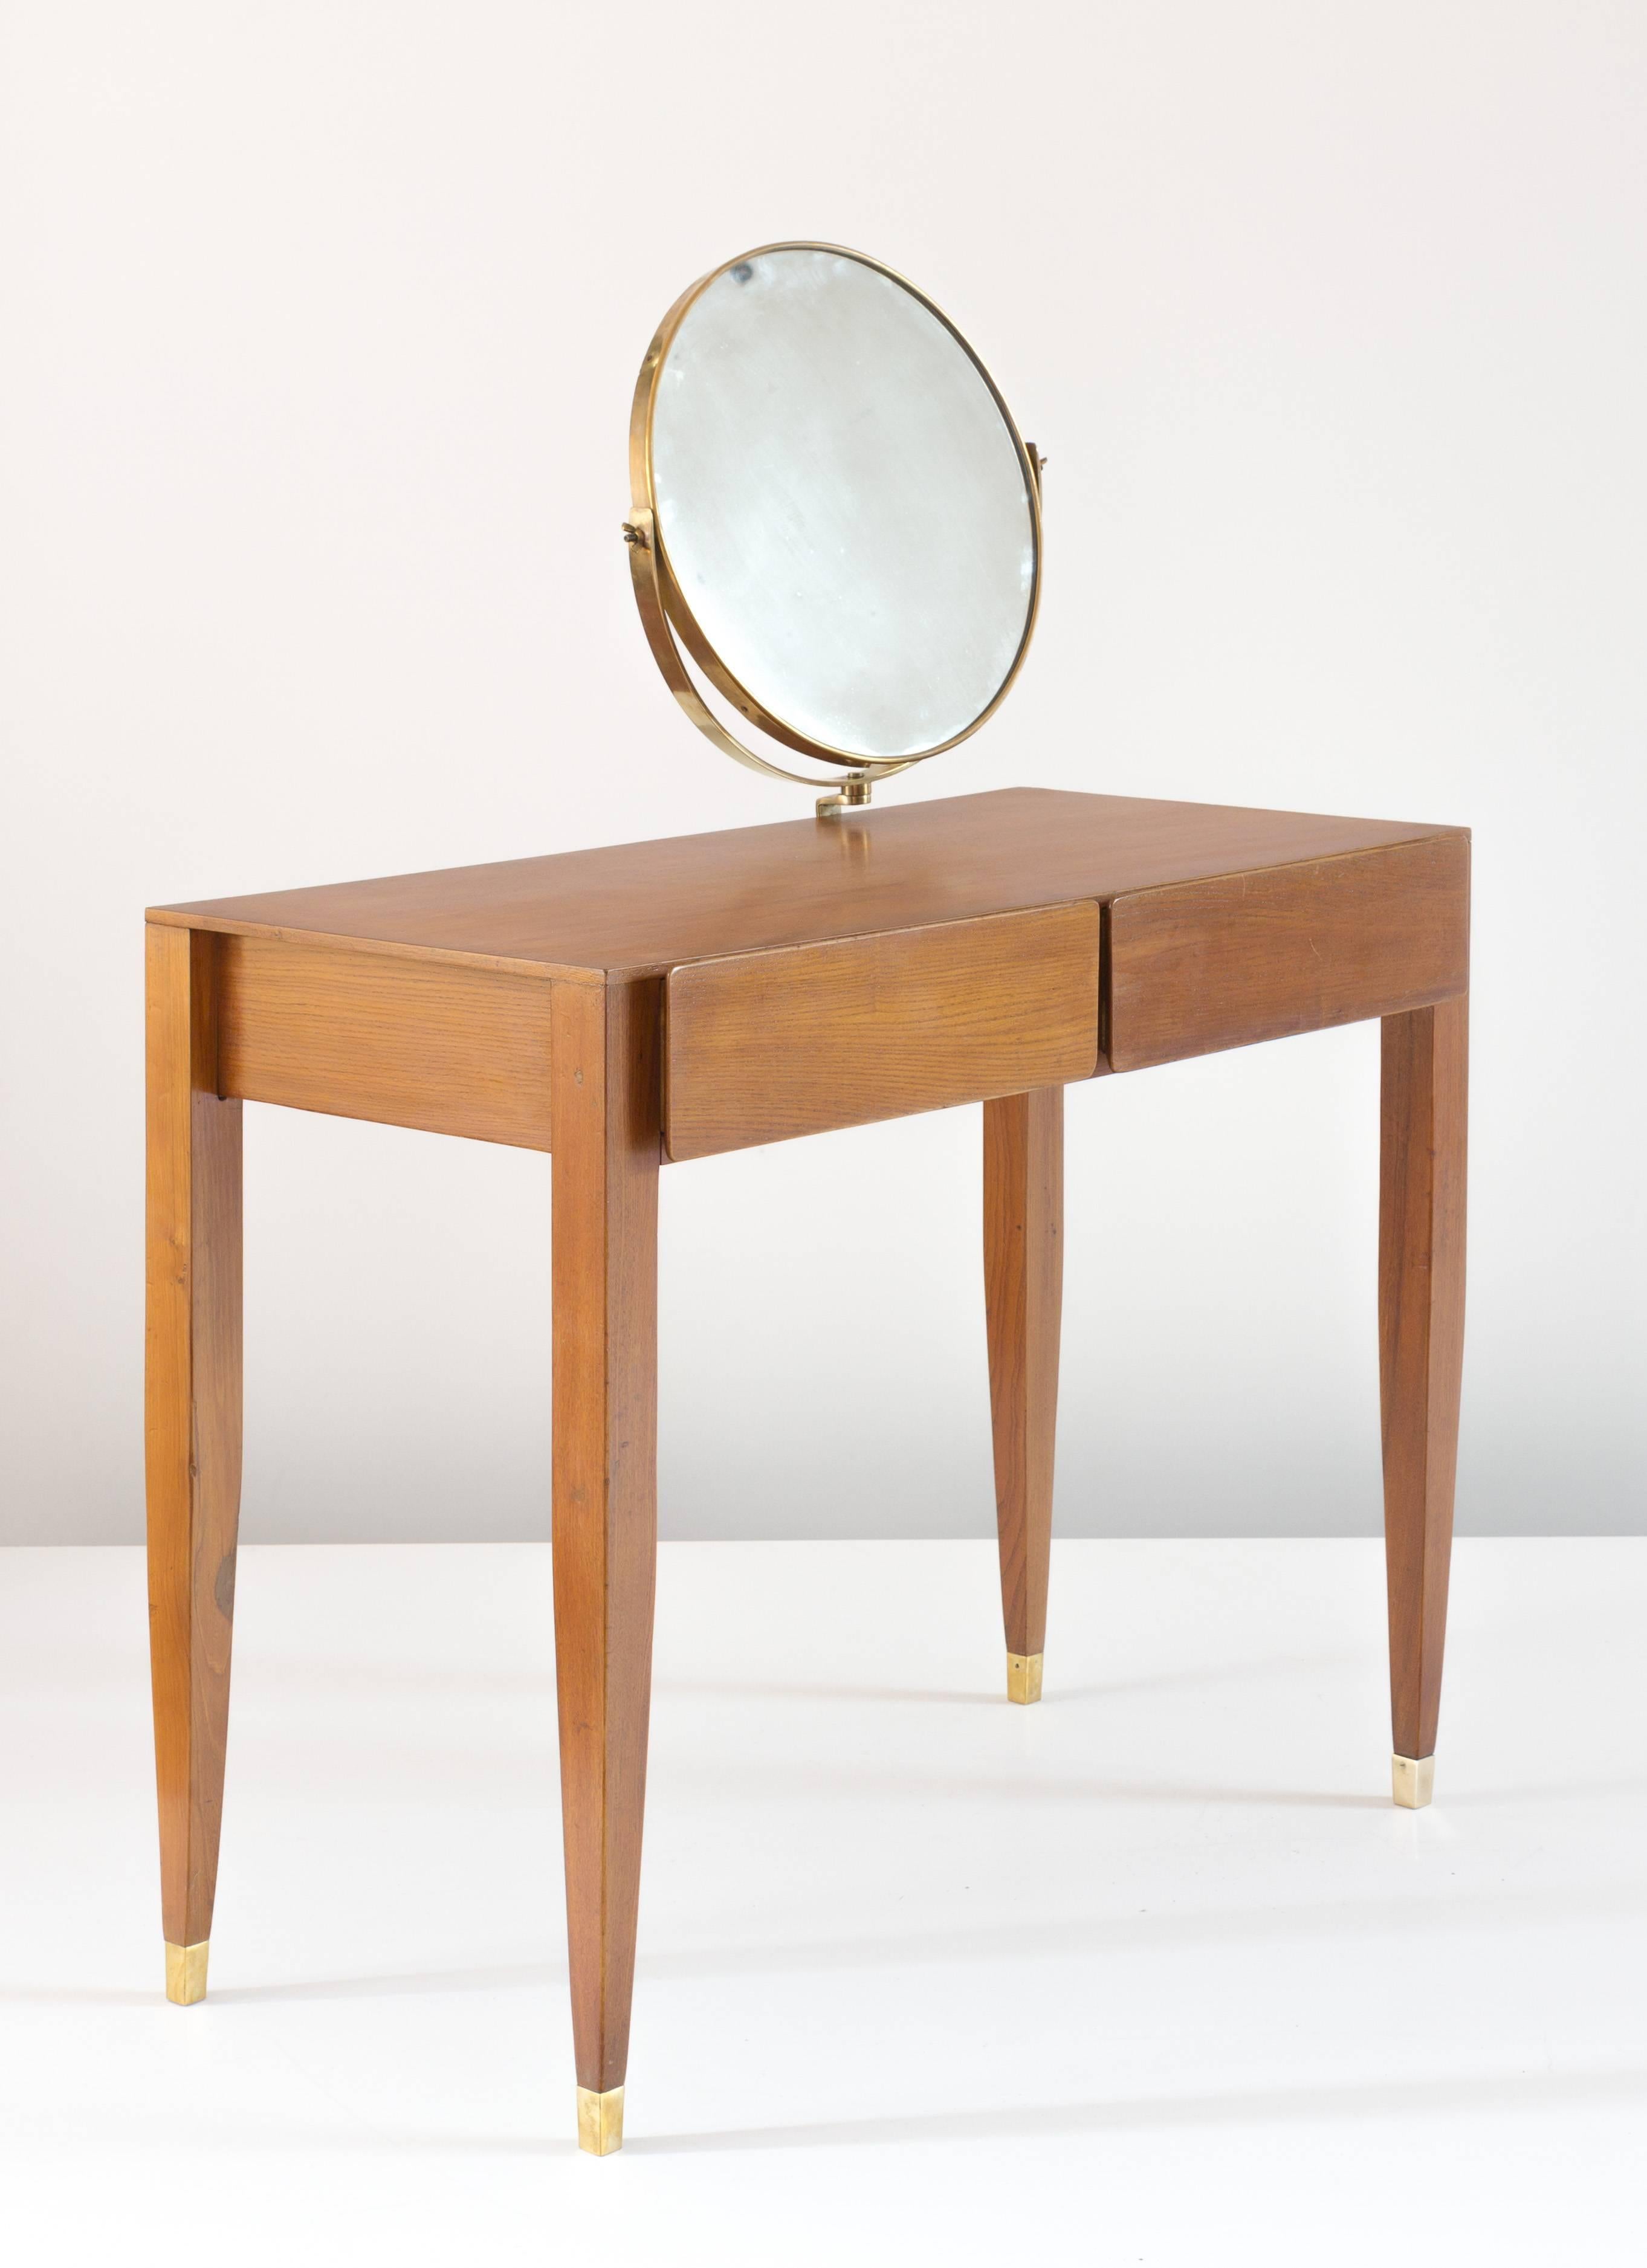 Gio Ponti vanity produced by Giordano Chiesa for the furniture of the Hotel Royal in Naples, 1955.
Original mirror by Fontana Arte. 
Pearwood, brass and mirror glass. 

Perfect original condition.

Measures: H 76.5cm 95 x 45 cm (vanity)